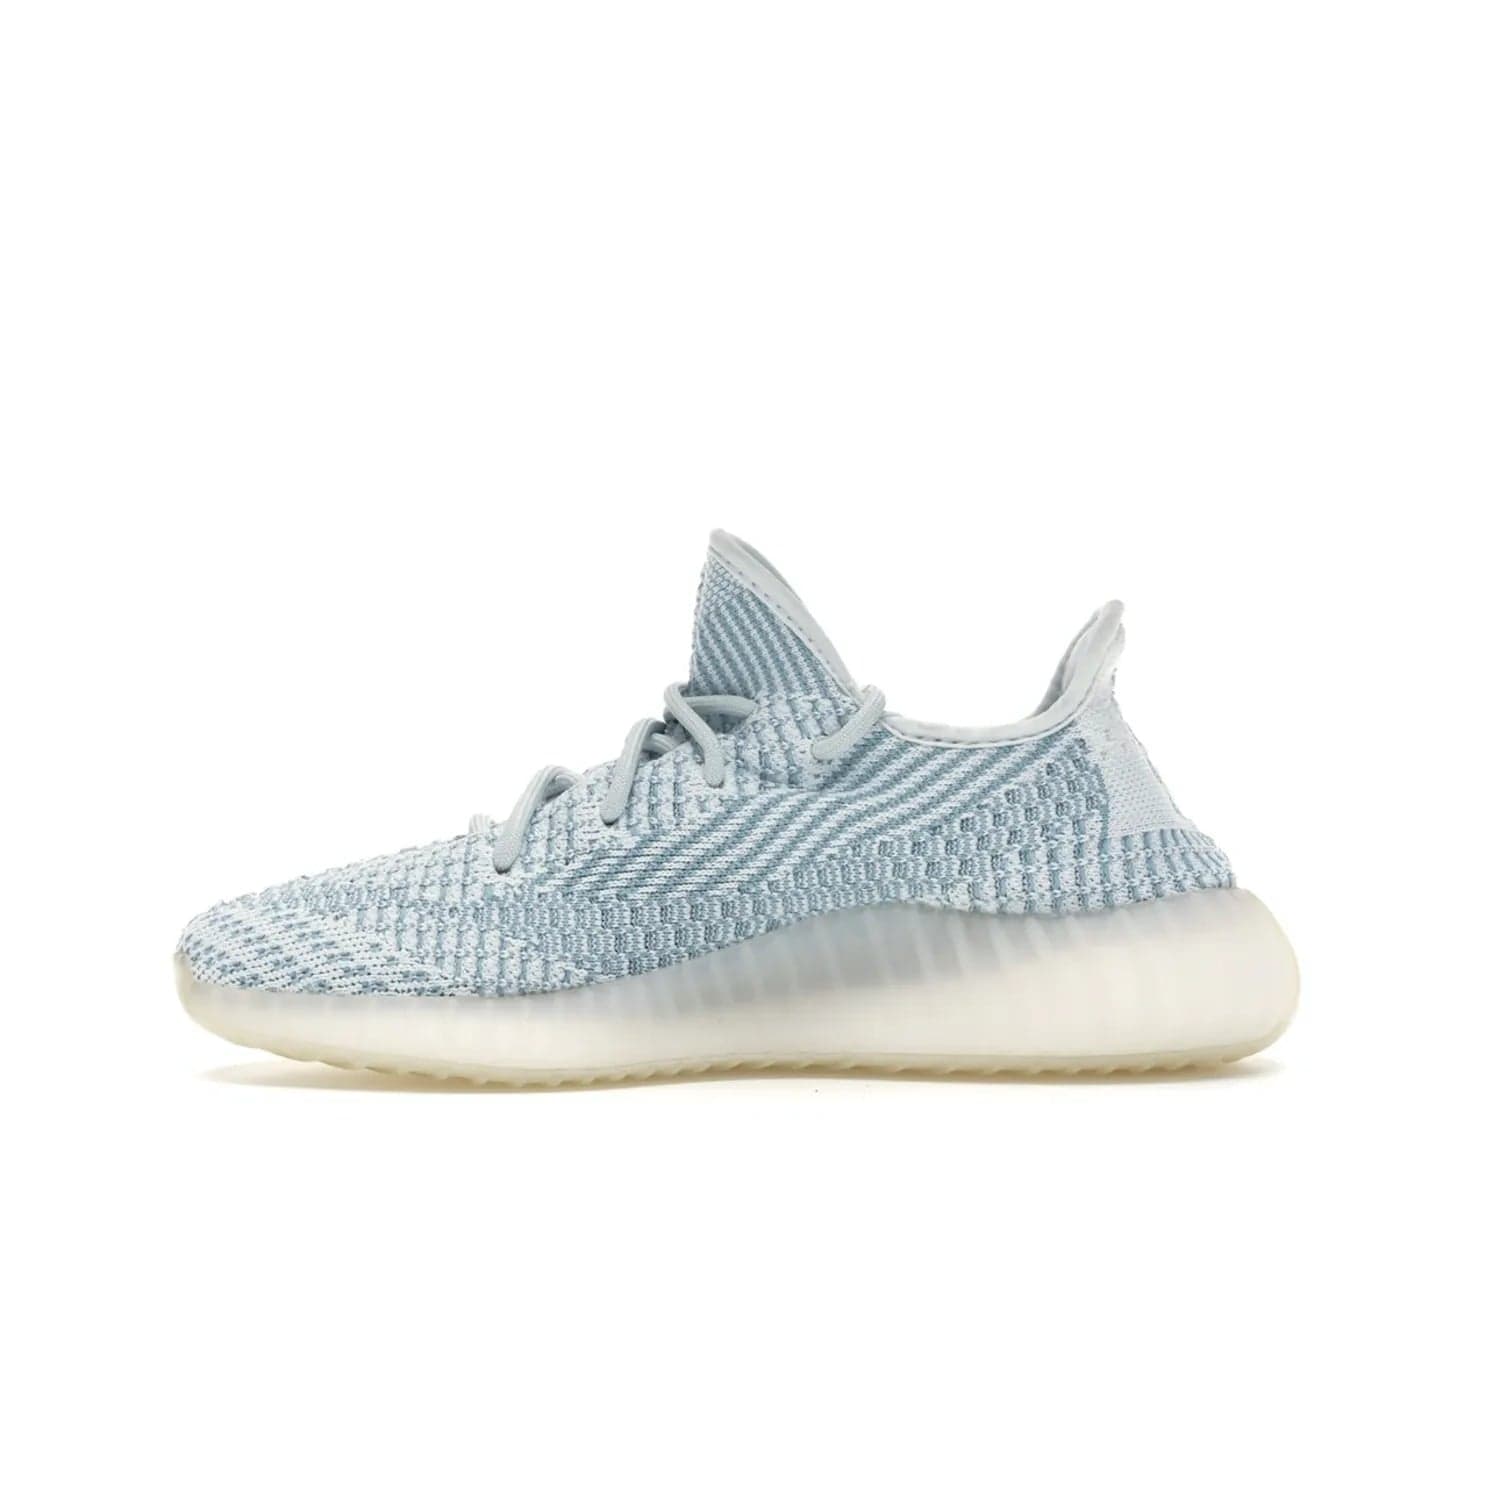 adidas Yeezy Boost 350 V2 Cloud White (Non-Reflective) - Image 19 - Only at www.BallersClubKickz.com - Adidas Yeezy Boost 350 V2 Cloud White (Non-Reflective) features Primeknit fabric and a unique, eye-catching design of cream, bluish-white, and transparent strip. Step out in timeless style with this eye-catching sneaker.